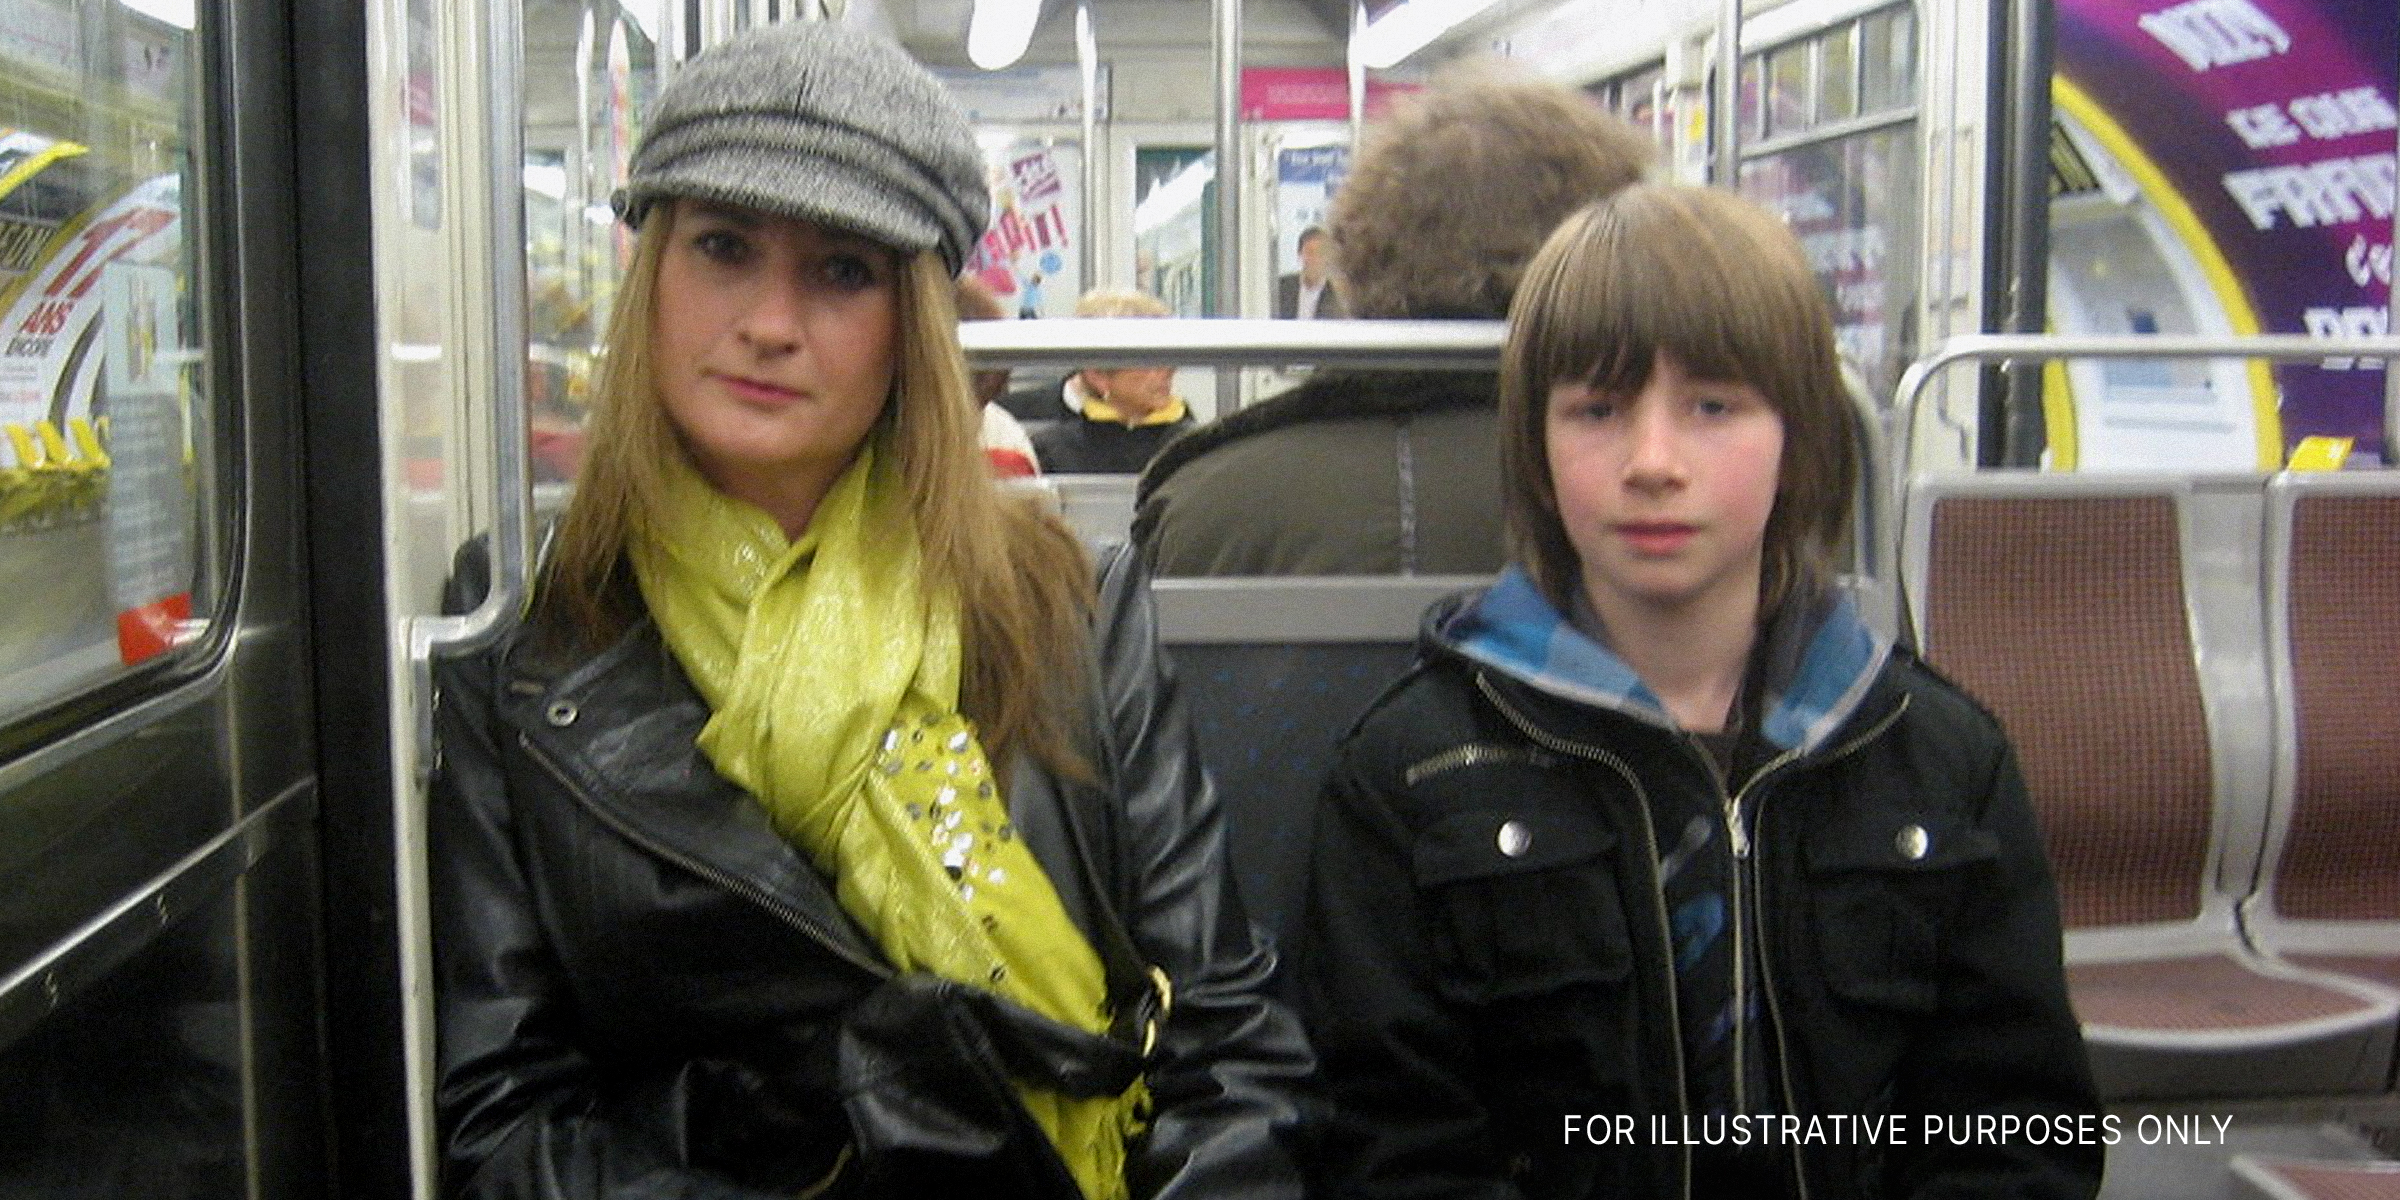 A woman and her son in a subway | Source: Flickr/SteveR-/CC BY 2.0